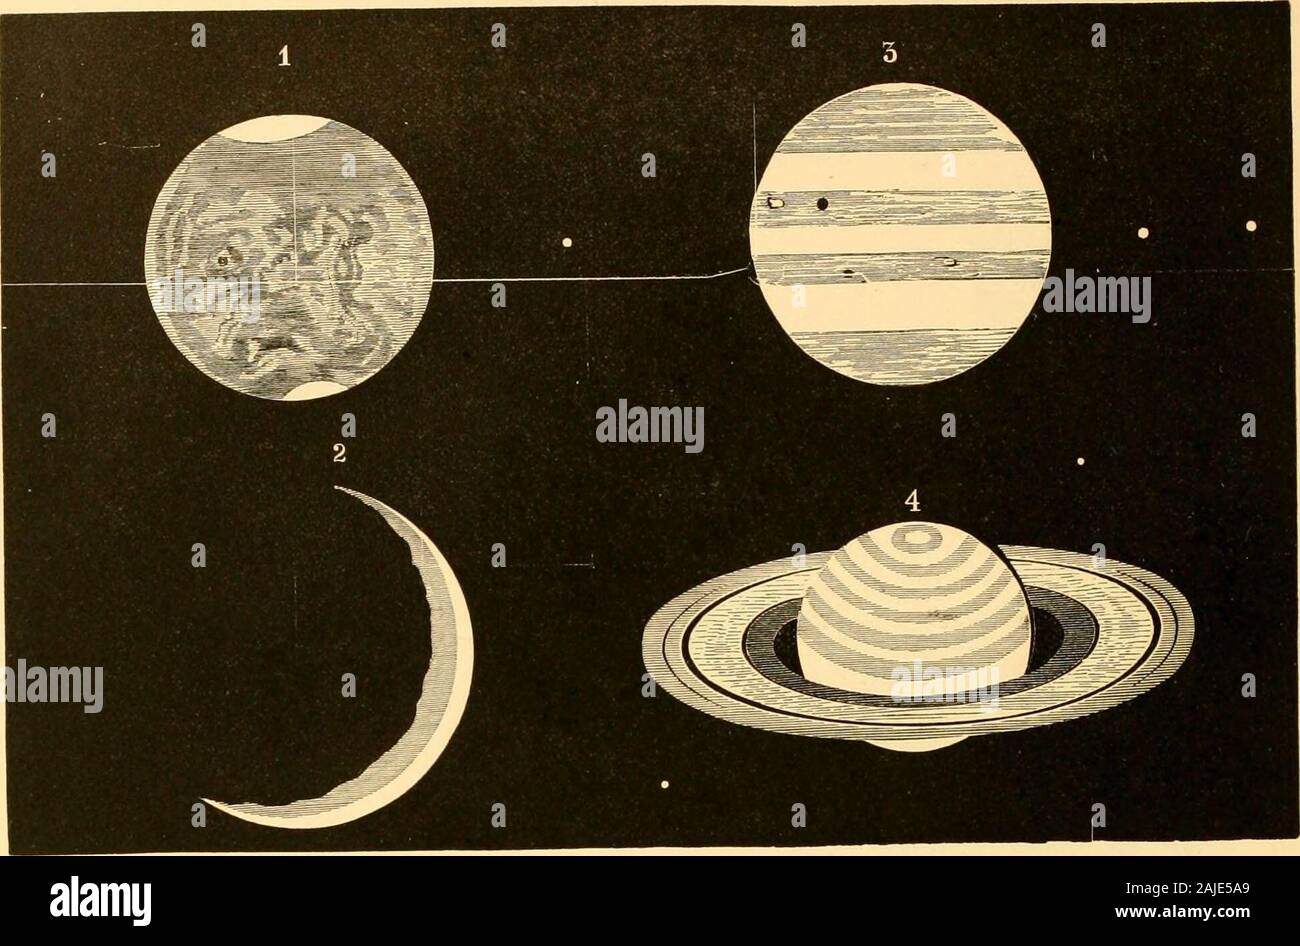 The world: historical and actual . heat, reflection, refraction, polarizing and absorb-ing, cohesion and repulsion. Taking water as astandard of unity, the density of the planets is asfollows: Neptune, 1*35; Uranus, 1-28: Saturn,•75; Jupiter, 1-38; Mars, 4-17; Earth, 5-66;Venus, 4-81; Mercury, 6-S5. The velocity ofplanets, stated in miles per second, is as follows:Neptune, 33G; Uranus, 4-20; Saturn, 595; Jupiter,8-06; Mars, 14-99; Earth, 18-38; Venus, 21-61;Mercury, 29-55. The average diameters of theplanets, expressed in miles, are as follows:Neptune, 34.500; Uranus, 31,700; Saturn, 70,-500; Stock Photo